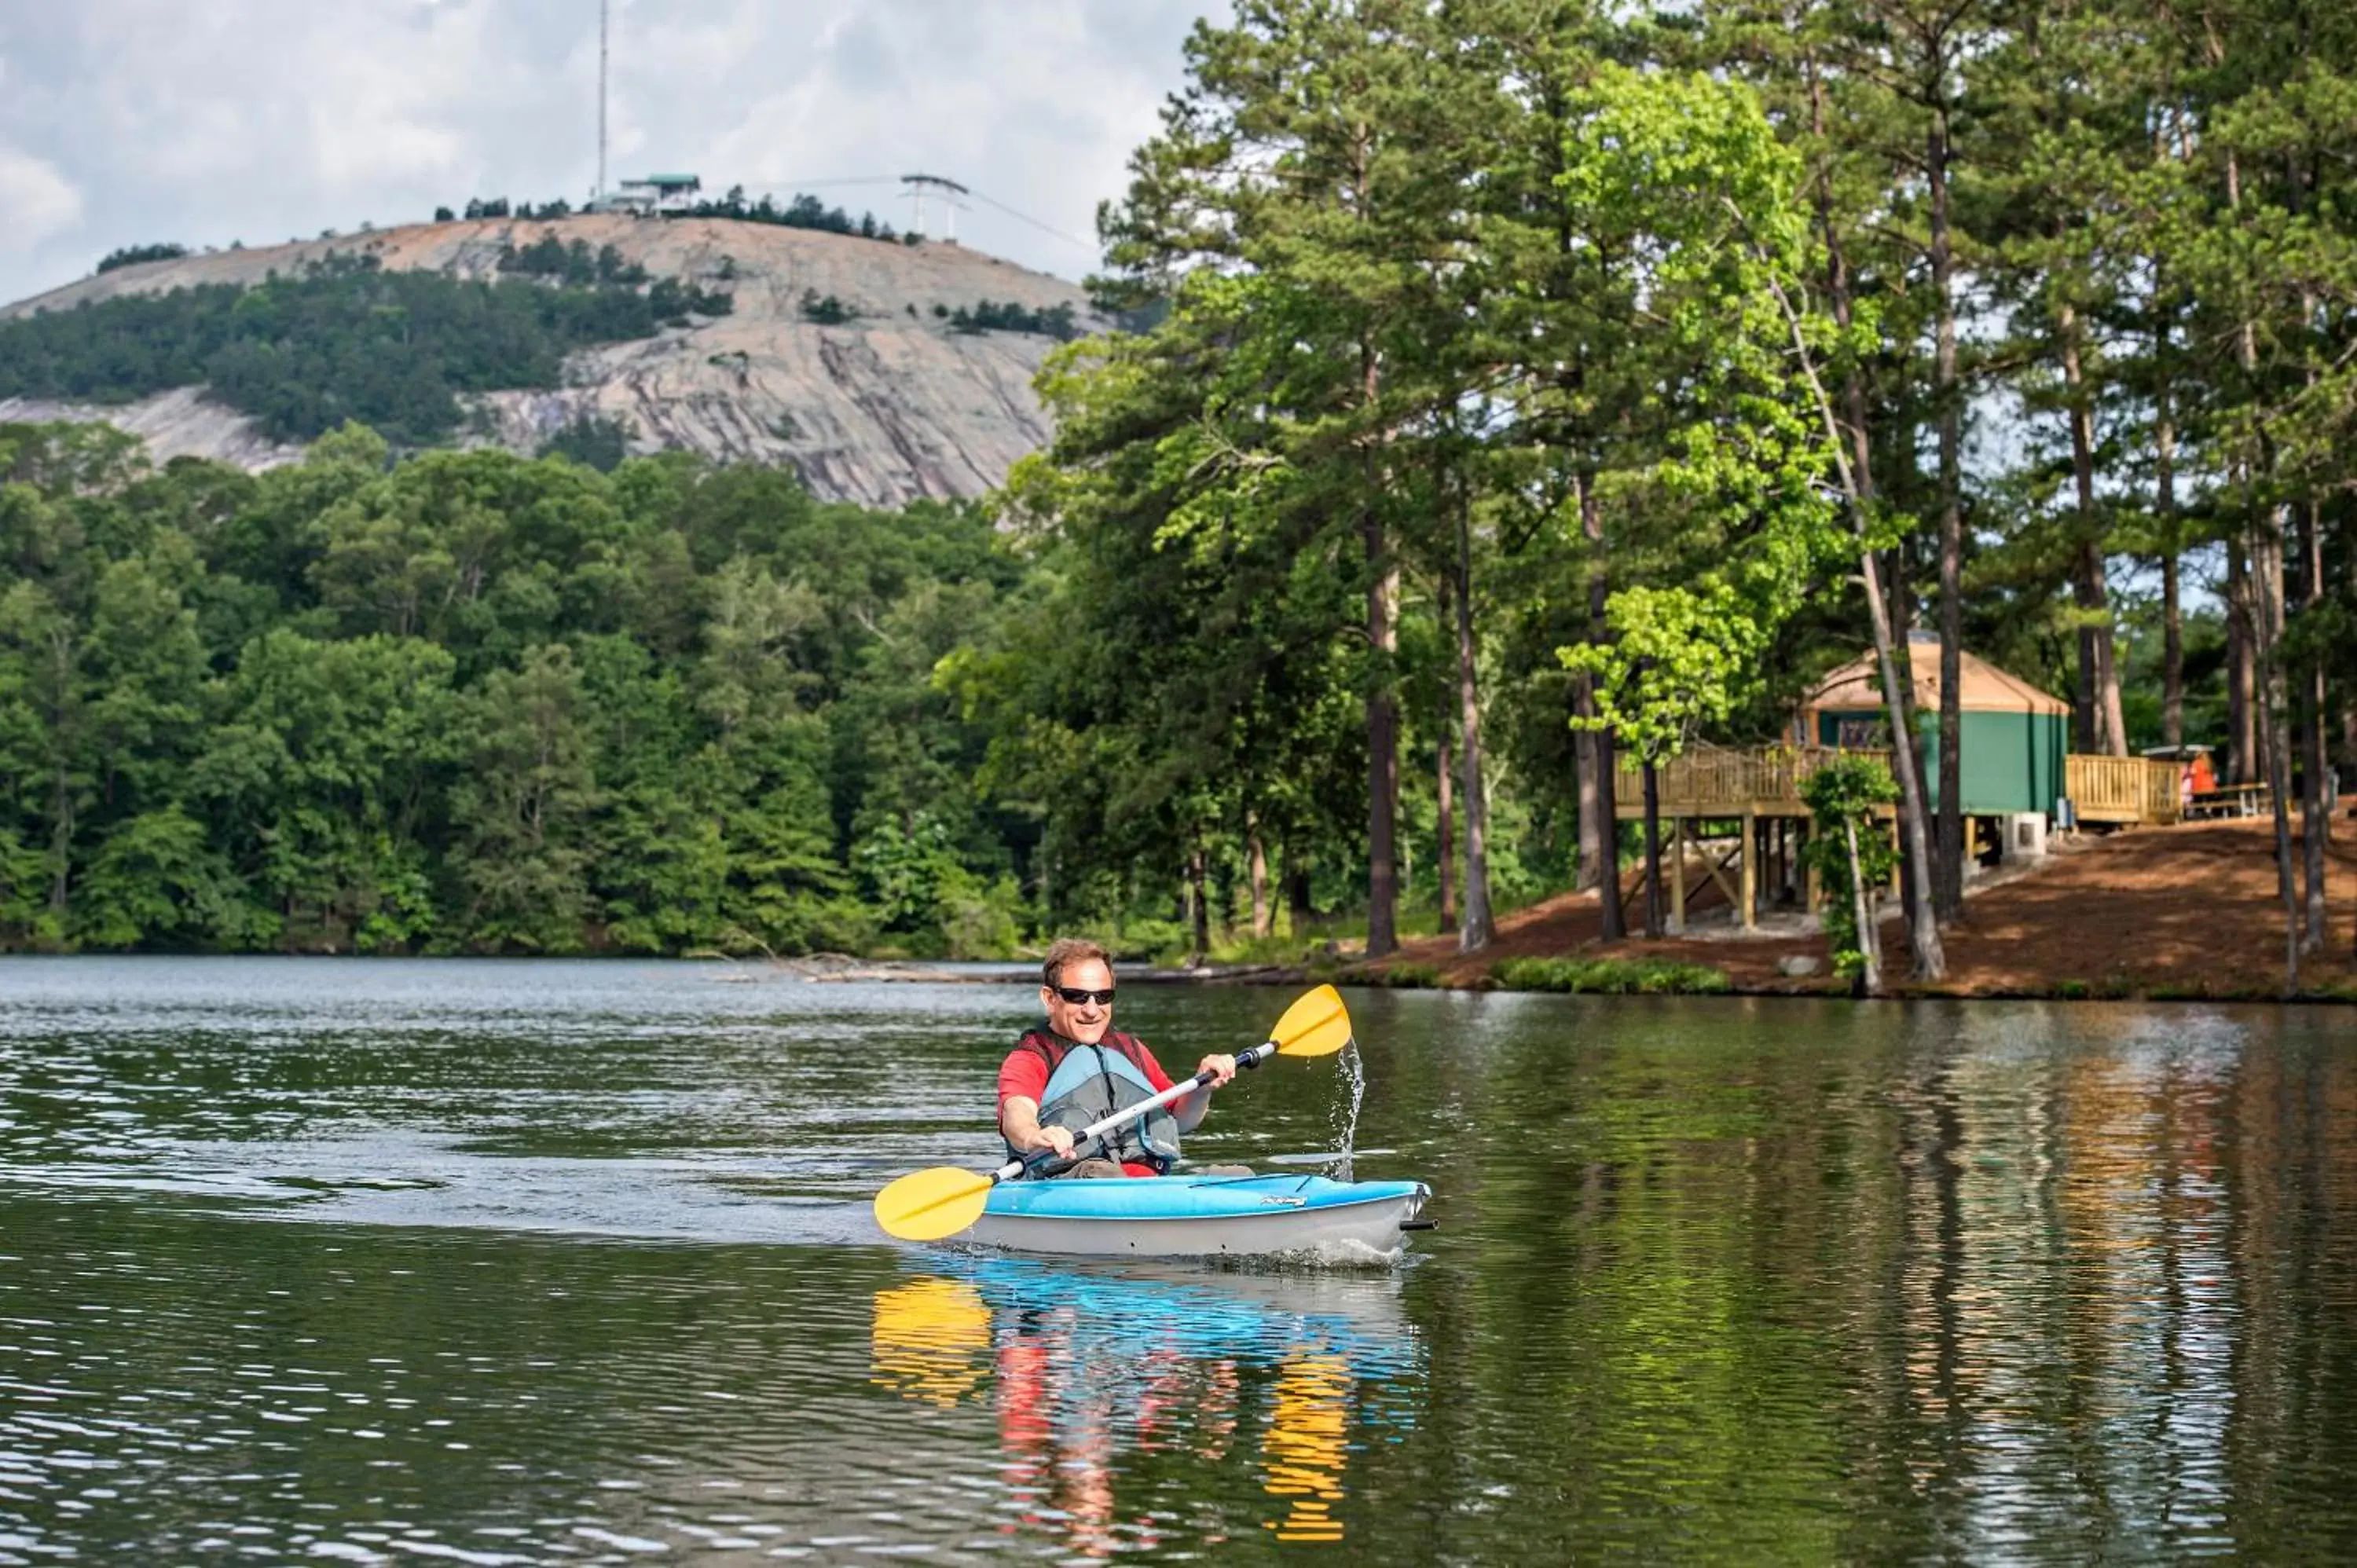 Natural landscape, Canoeing in The Inn at Stone Mountain Park